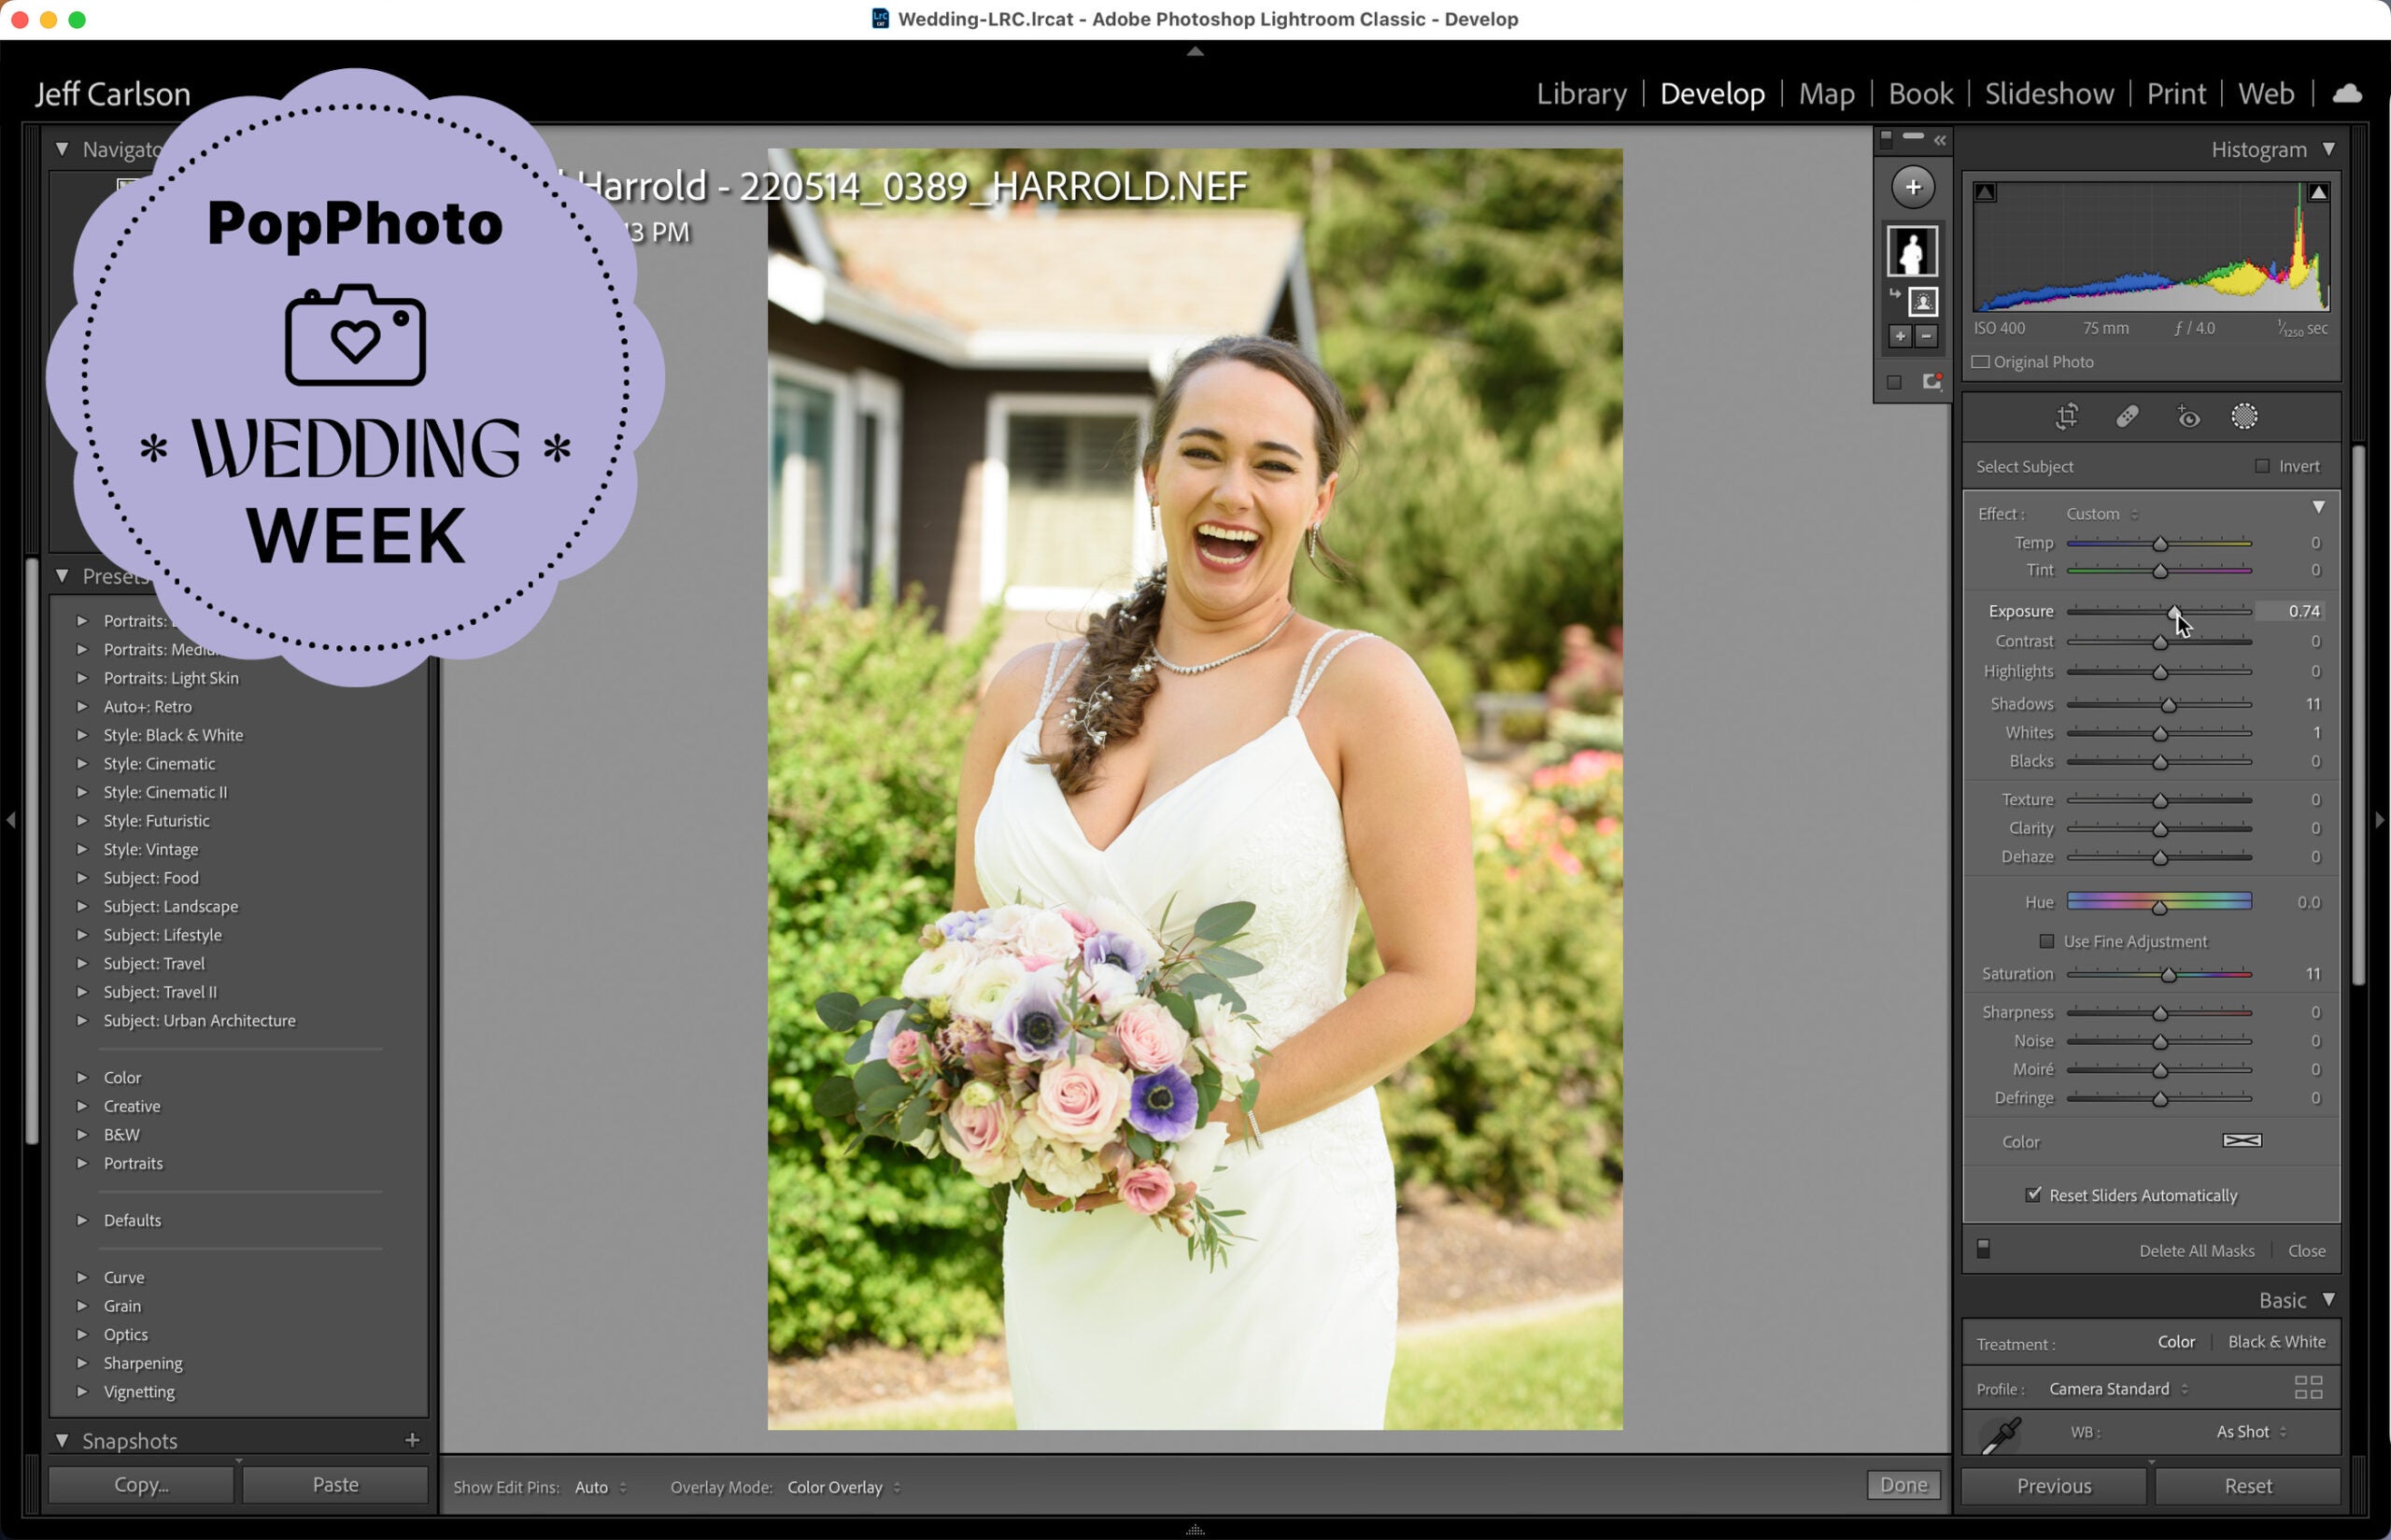 Turbocharge your wedding edits with the help of AI